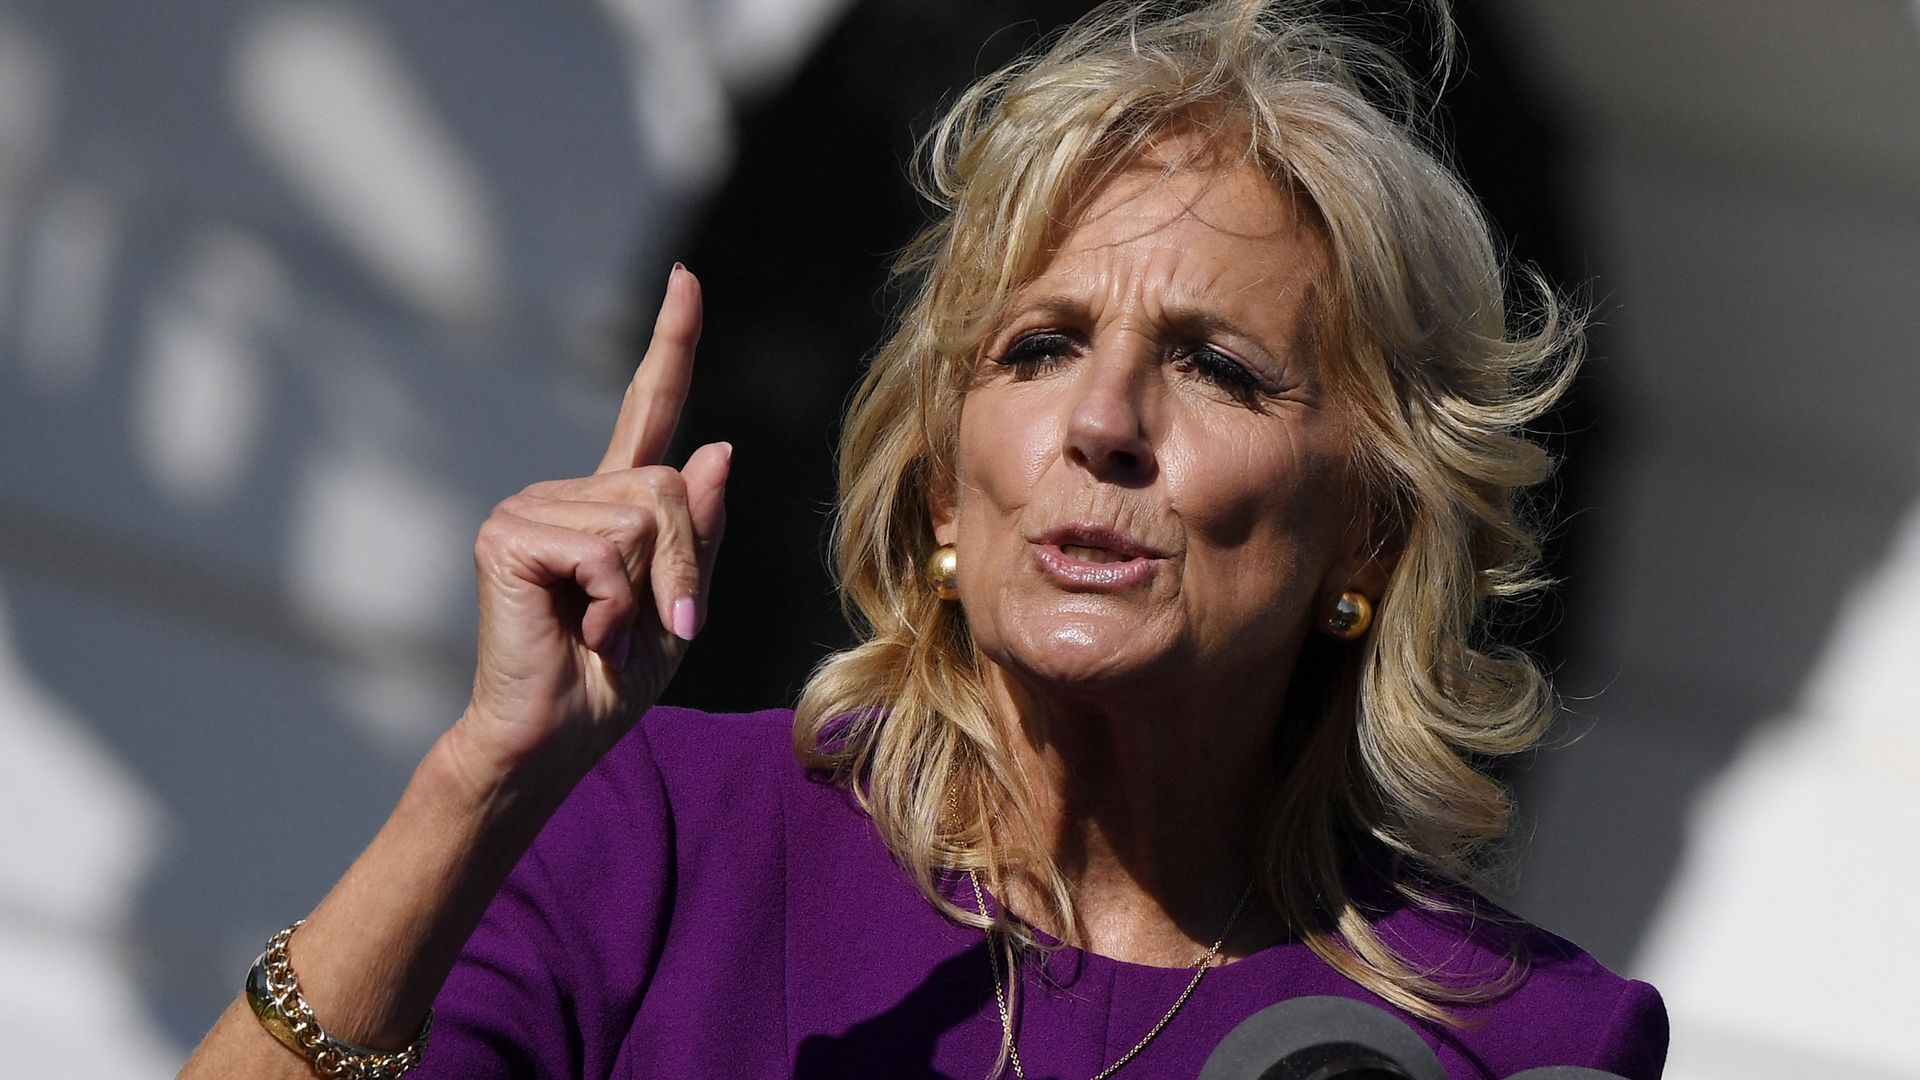 First lady Jill Biden is seen speaking at the White House.